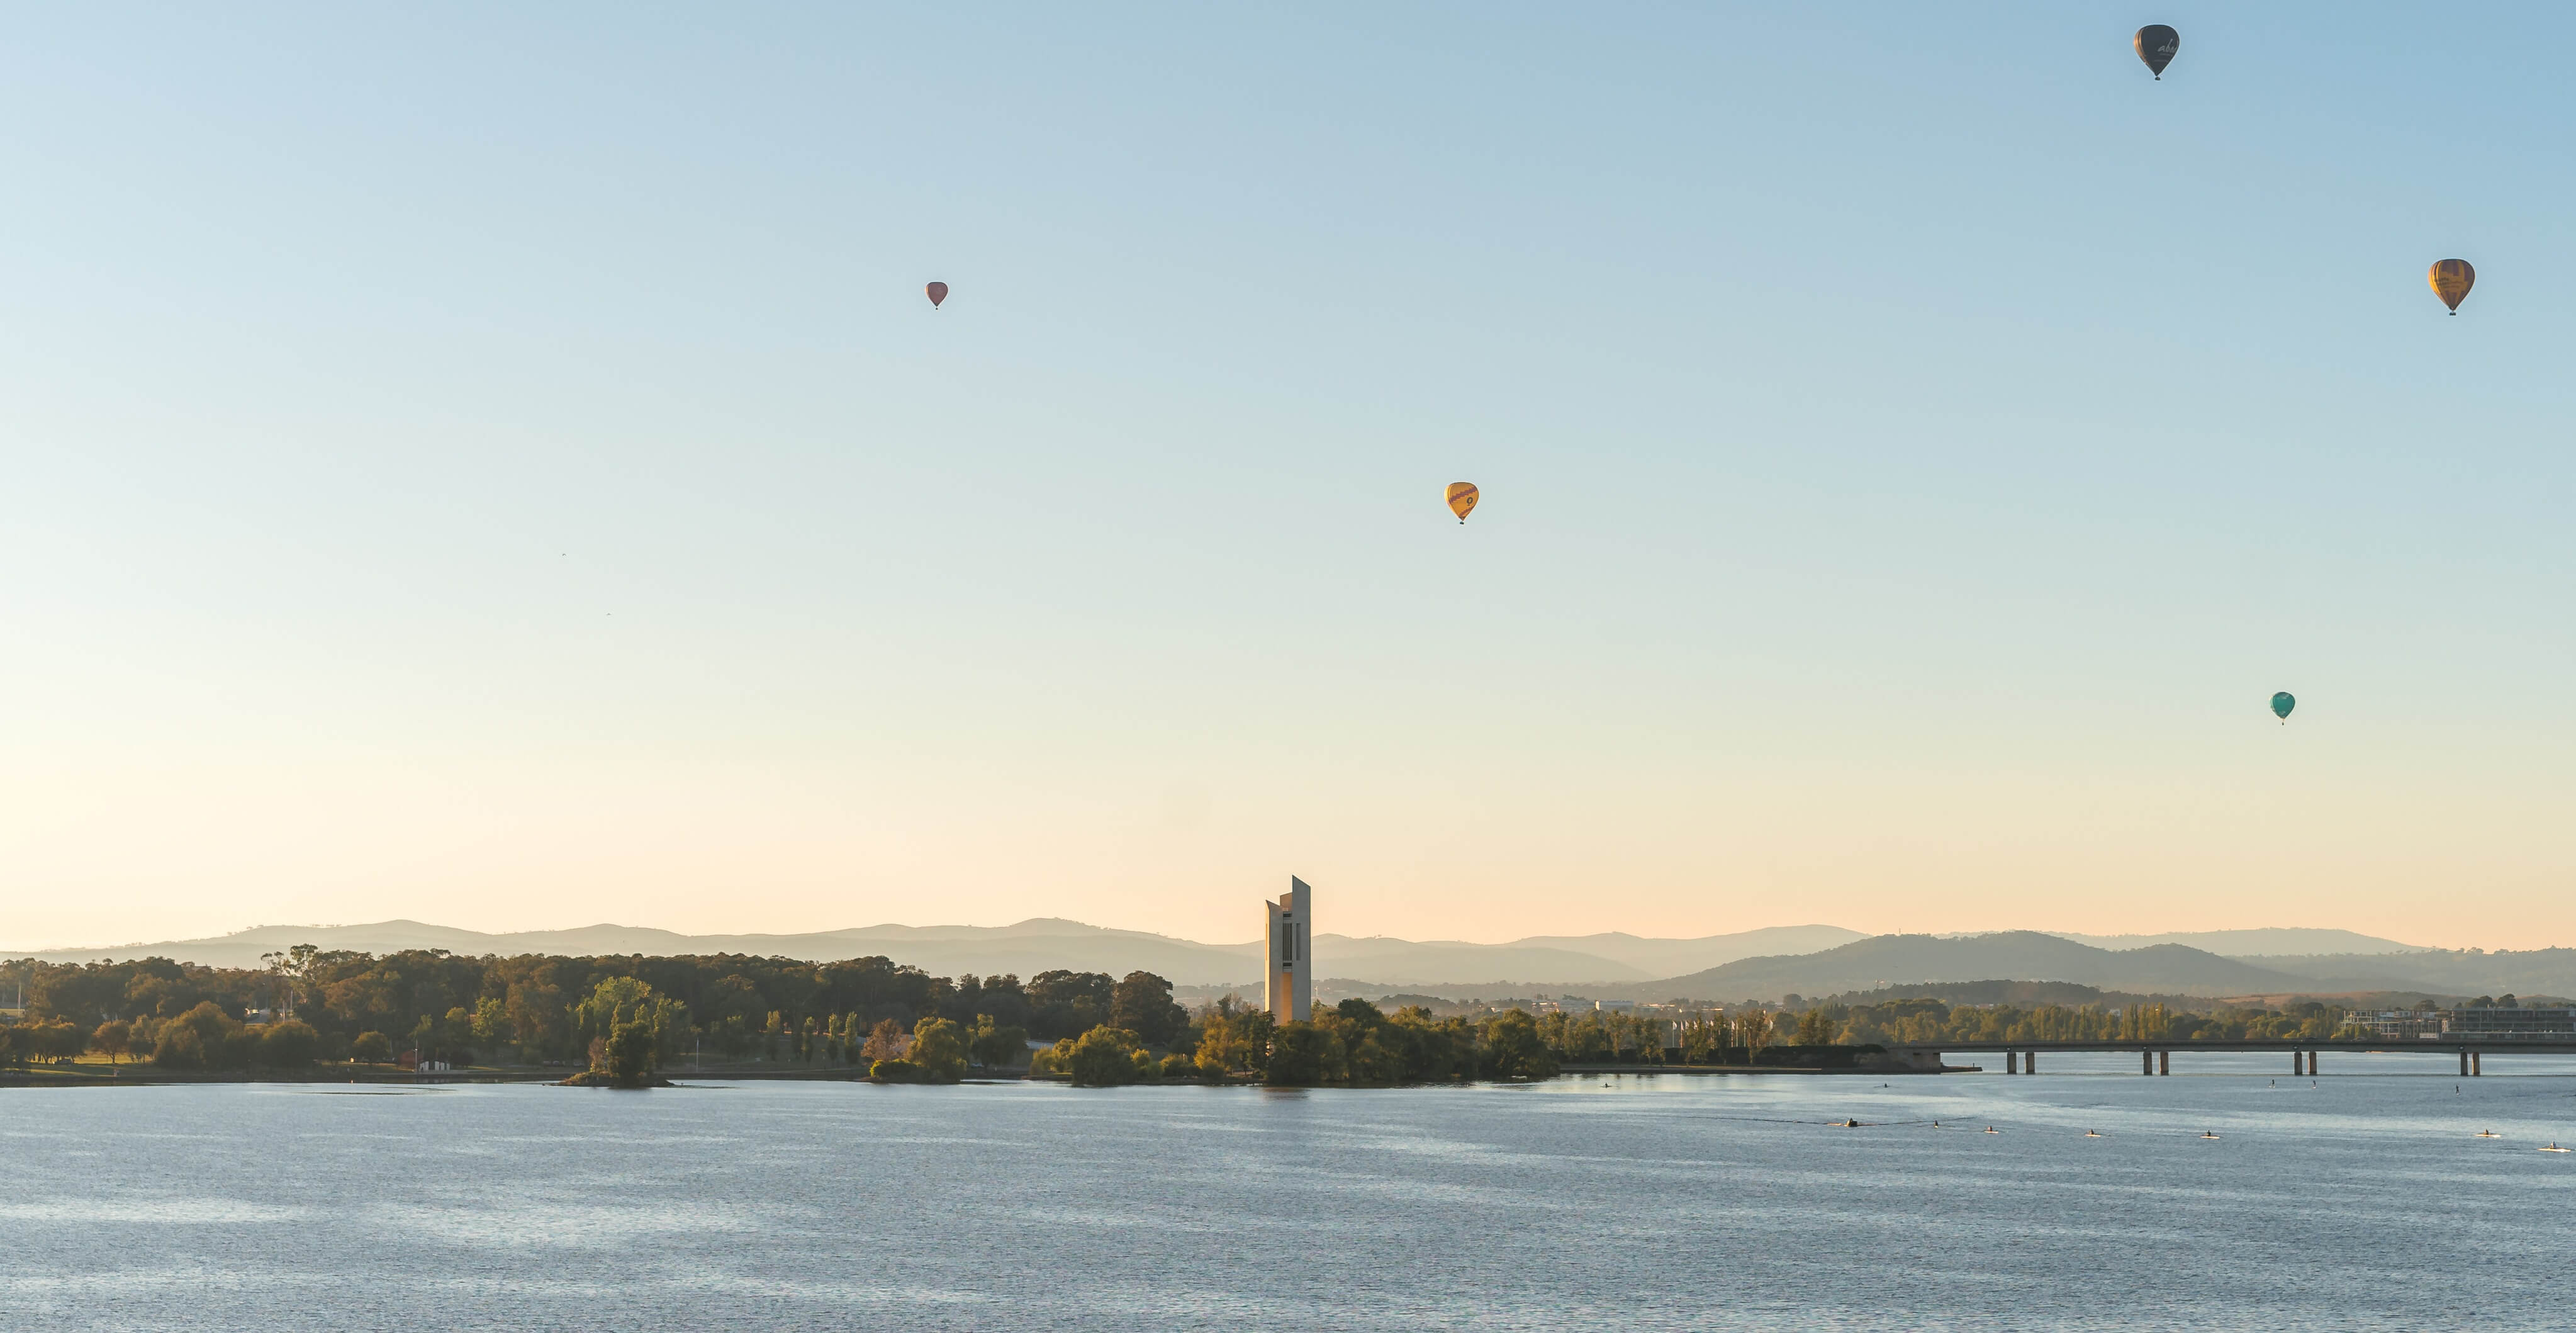 A lake in Canberra with a building in the middle and several hot air balloons at sunrise